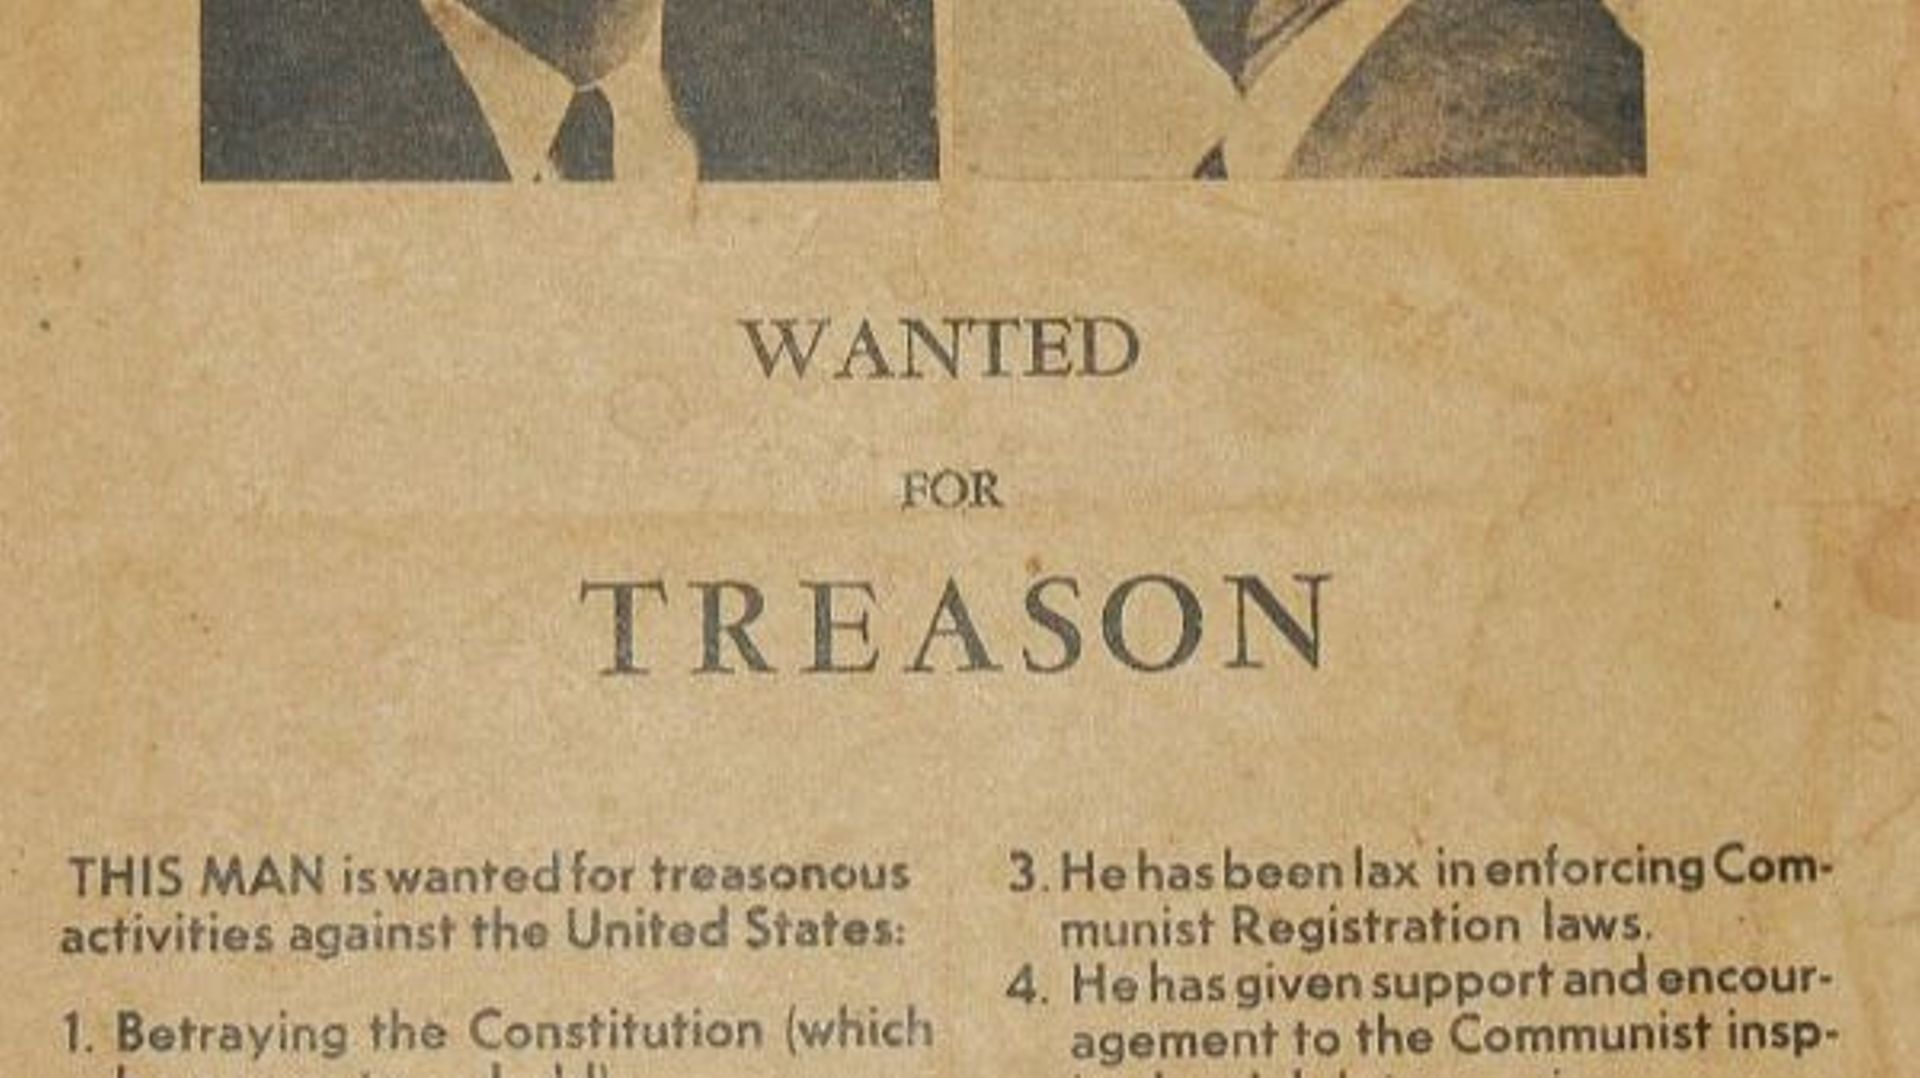 "Wanted for Treason"